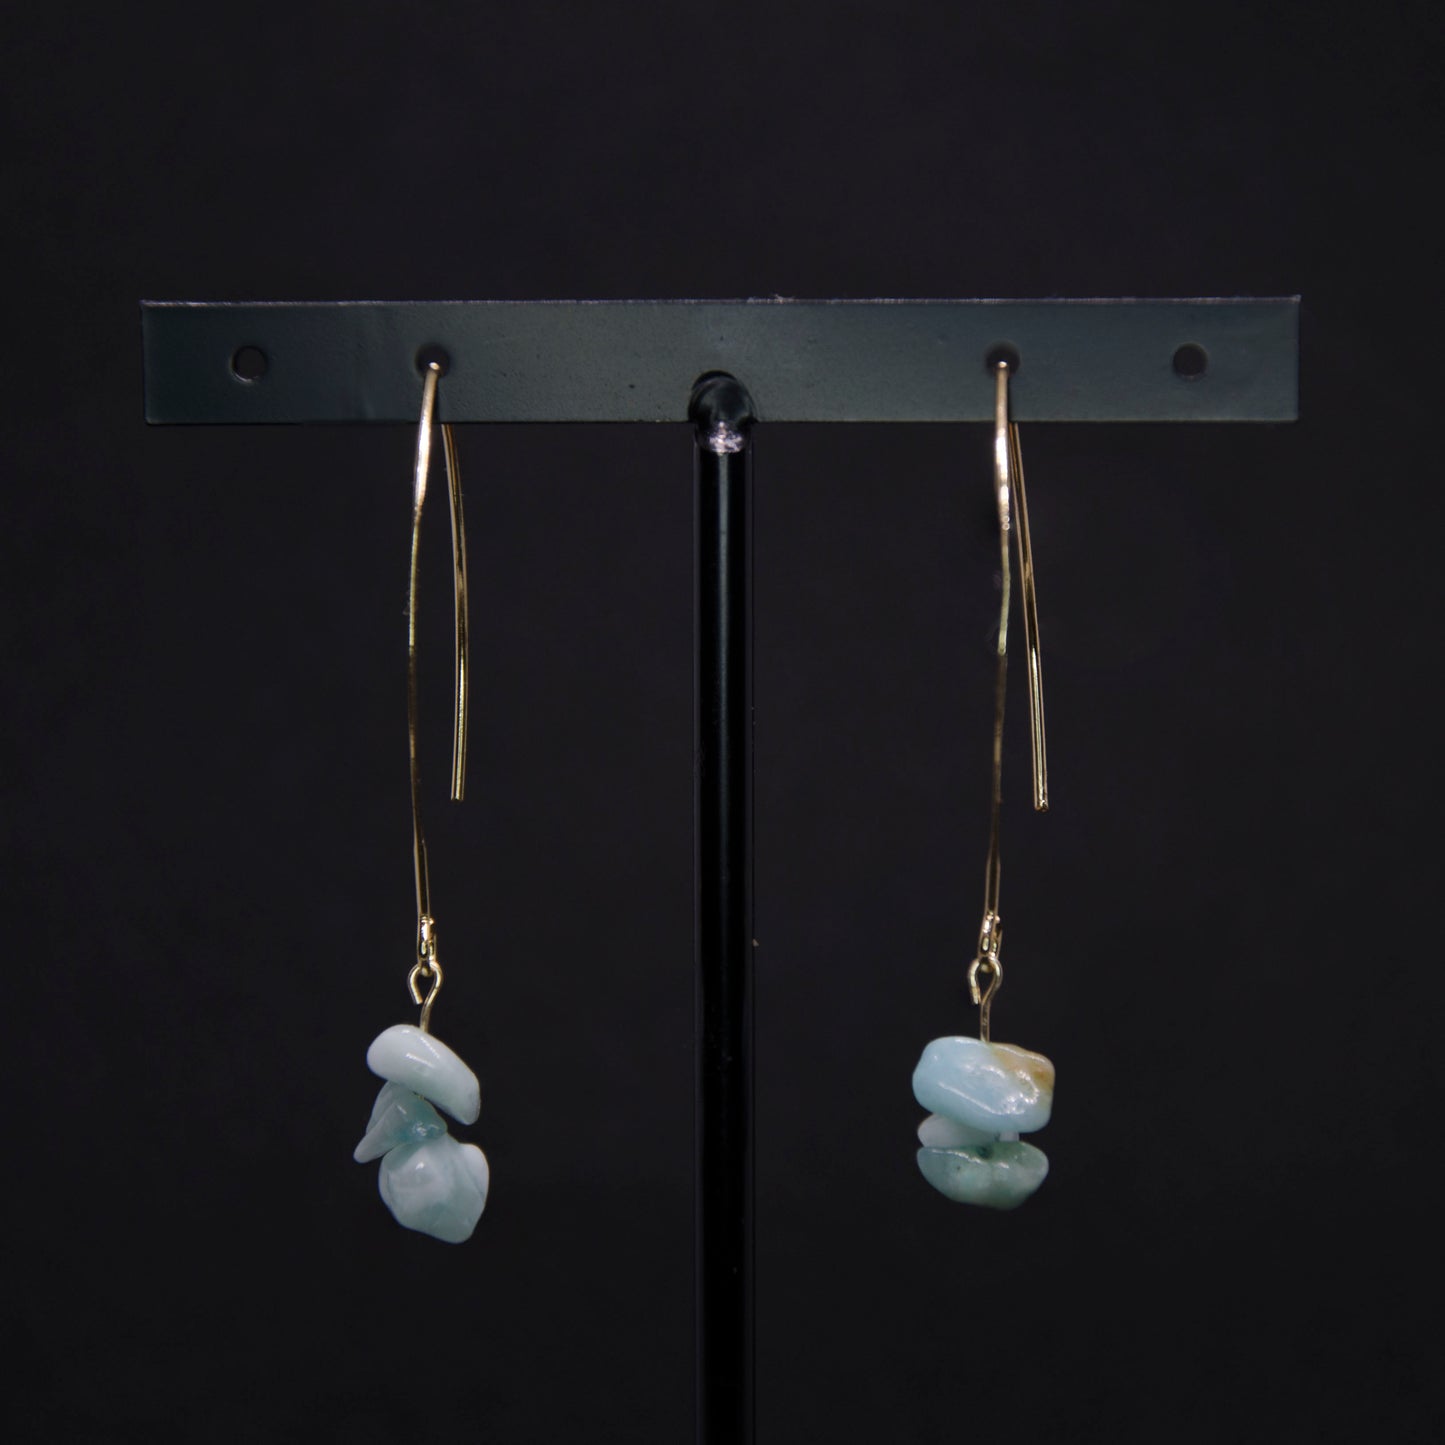 Soothing x Love • Earrings  • Amazonite x 18K Gold plated